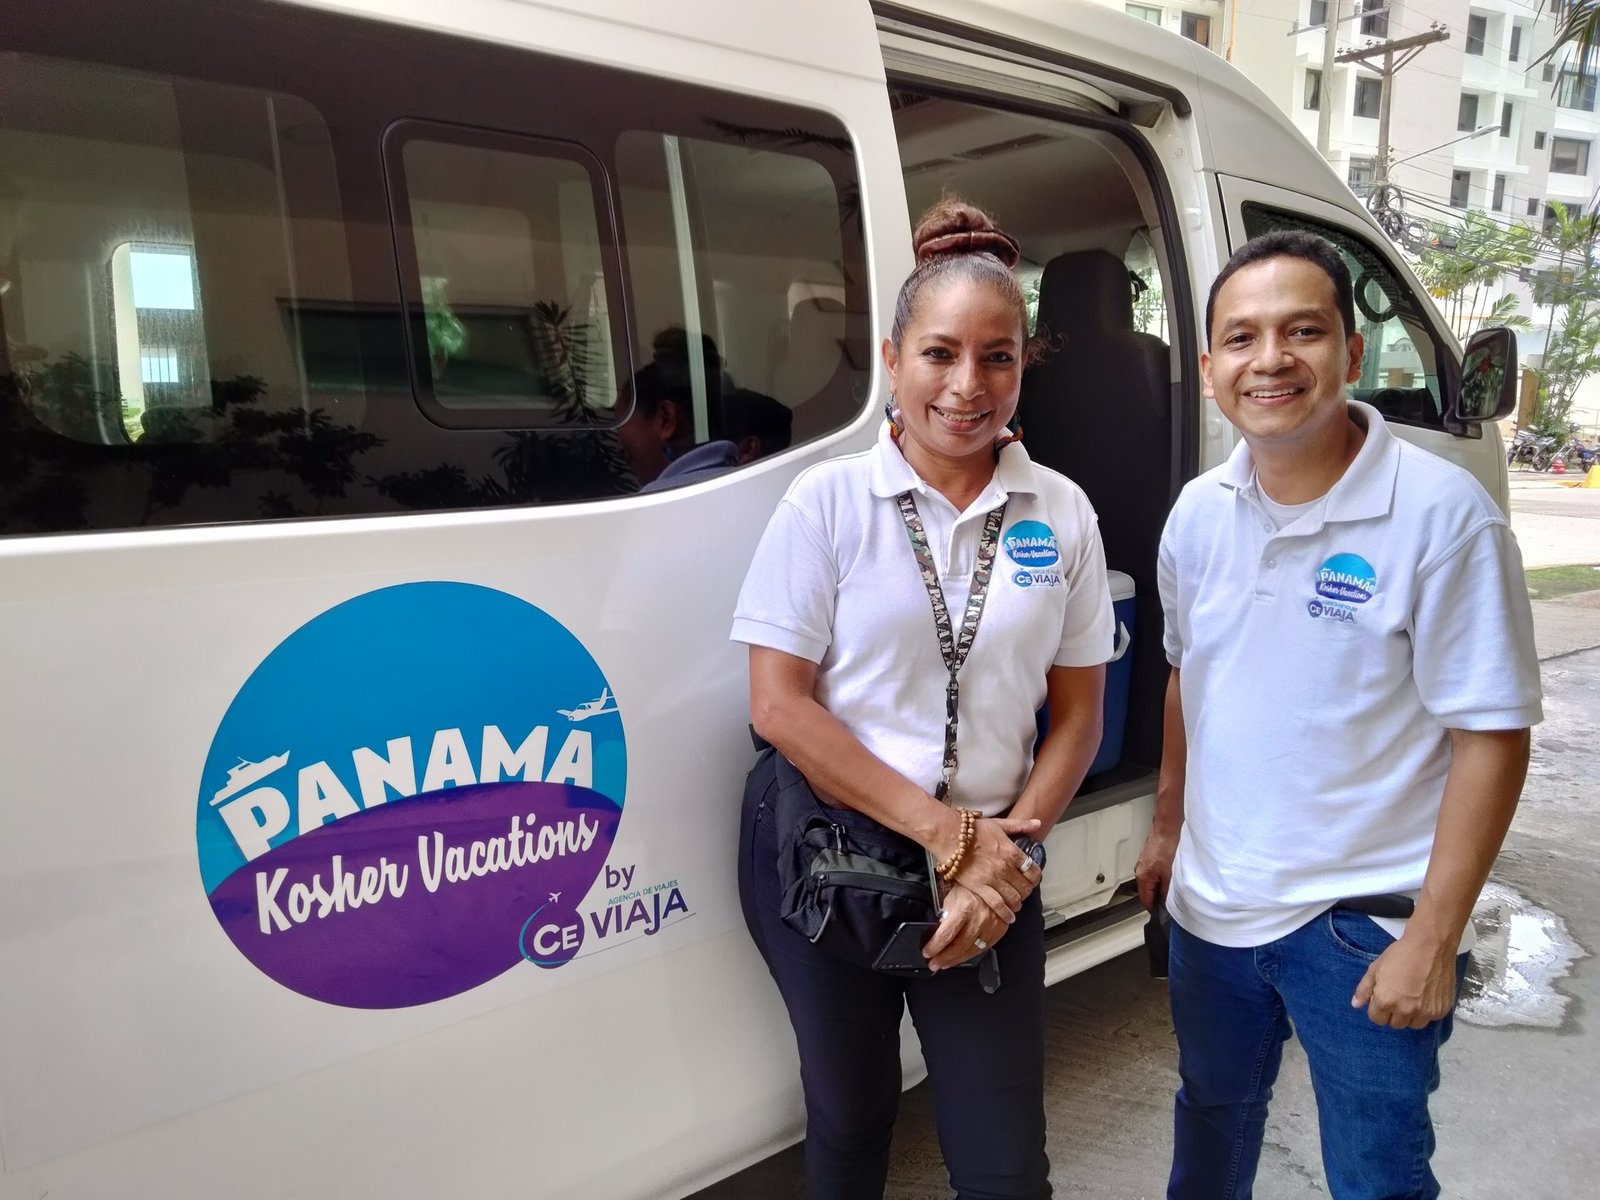 Real People Of Panama Kosher Vacations Are Ready To Help You